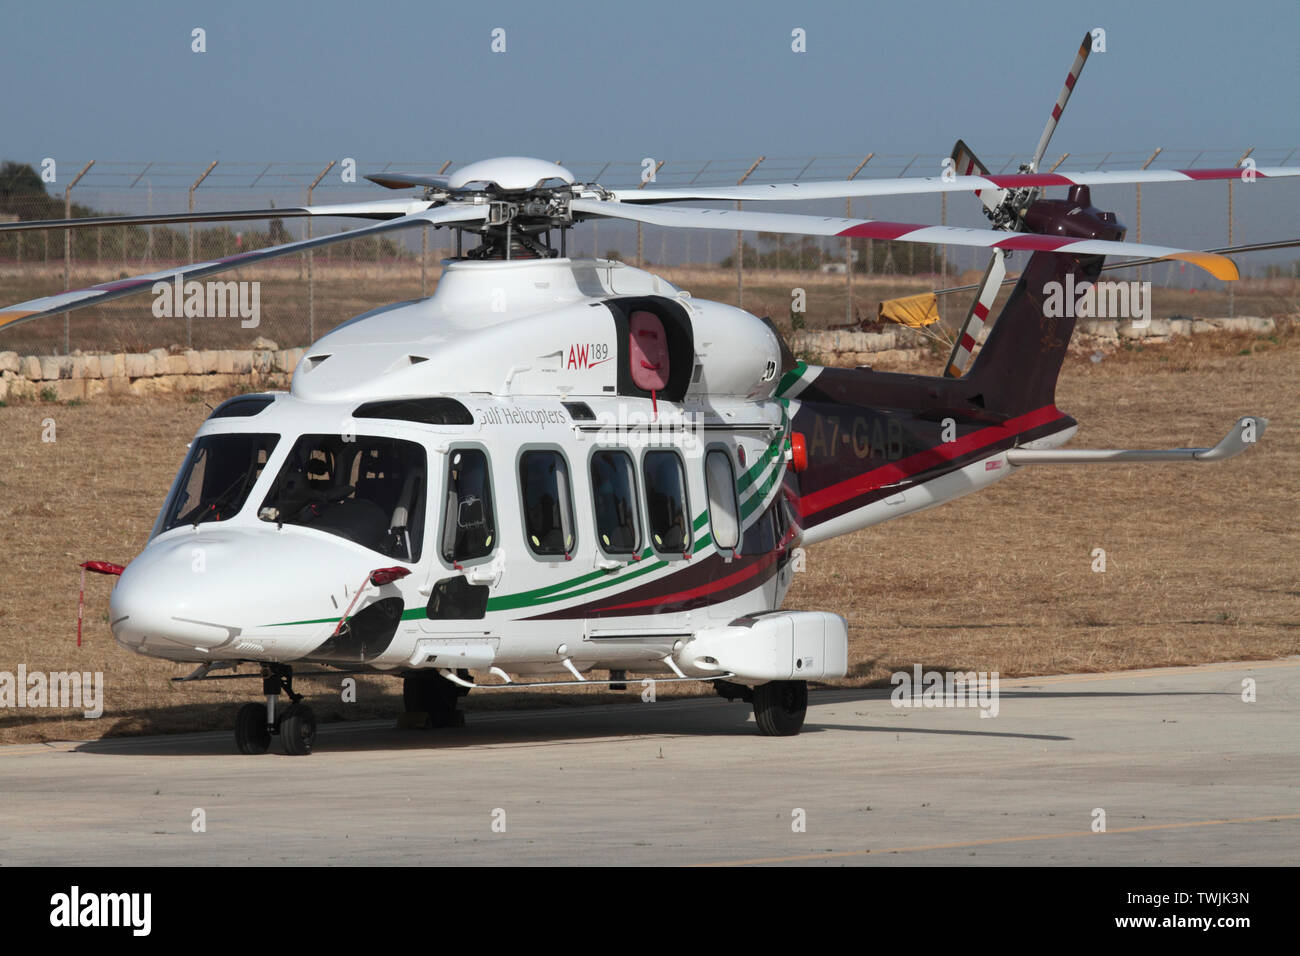 Leonardo (AgustaWestland) AW189 helicopter in the colours of Gulf Helicopters parked on the ground Stock Photo